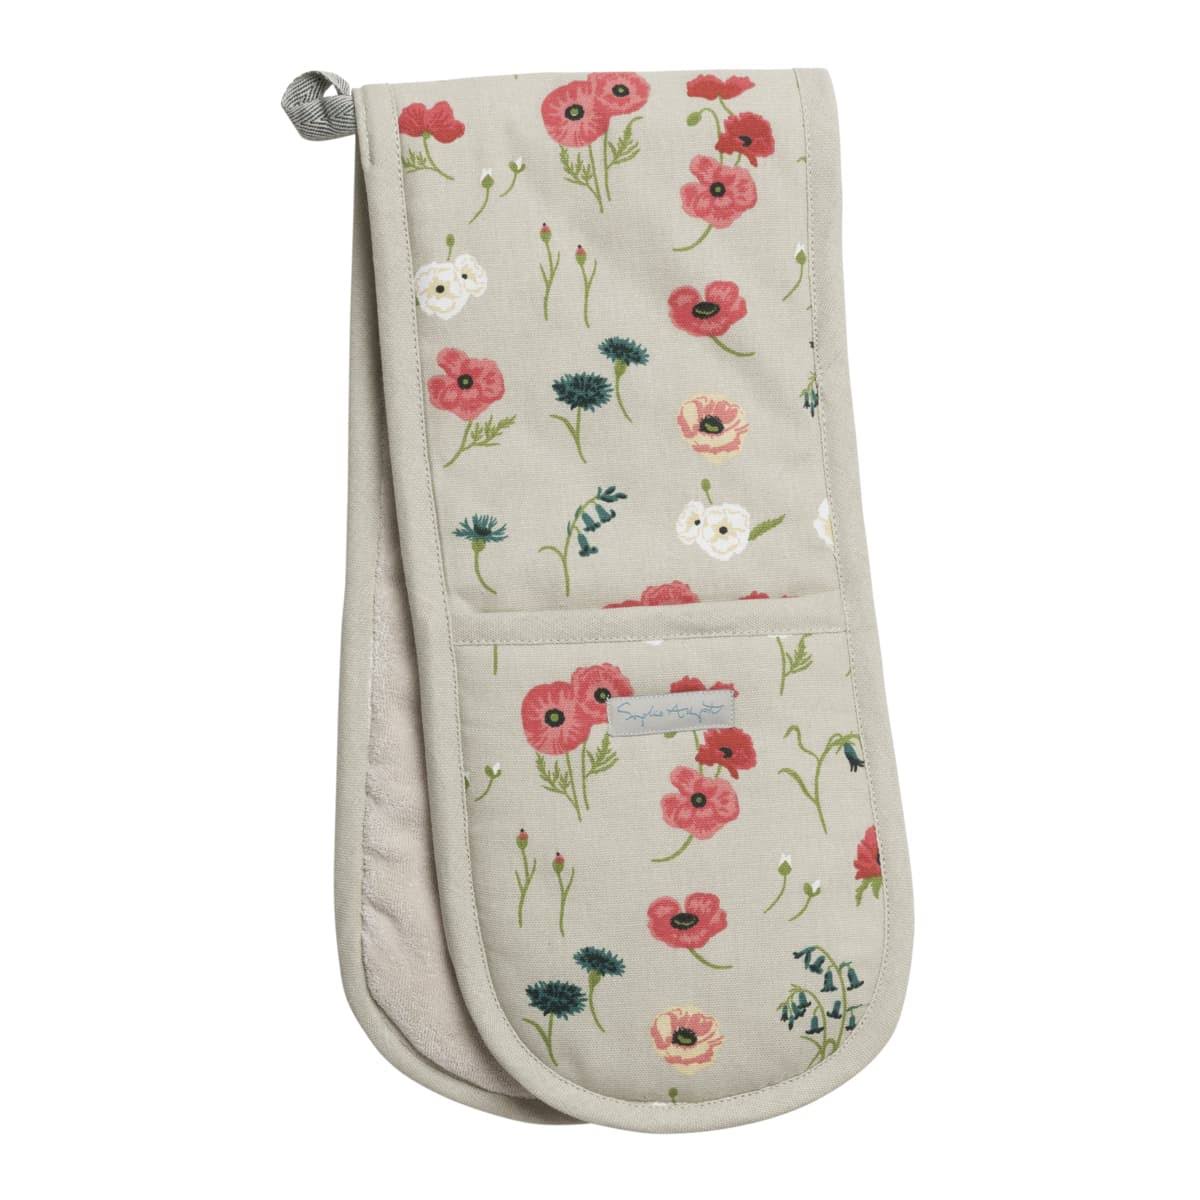 Poppy Meadow Double Oven Glove by Sophie Allport